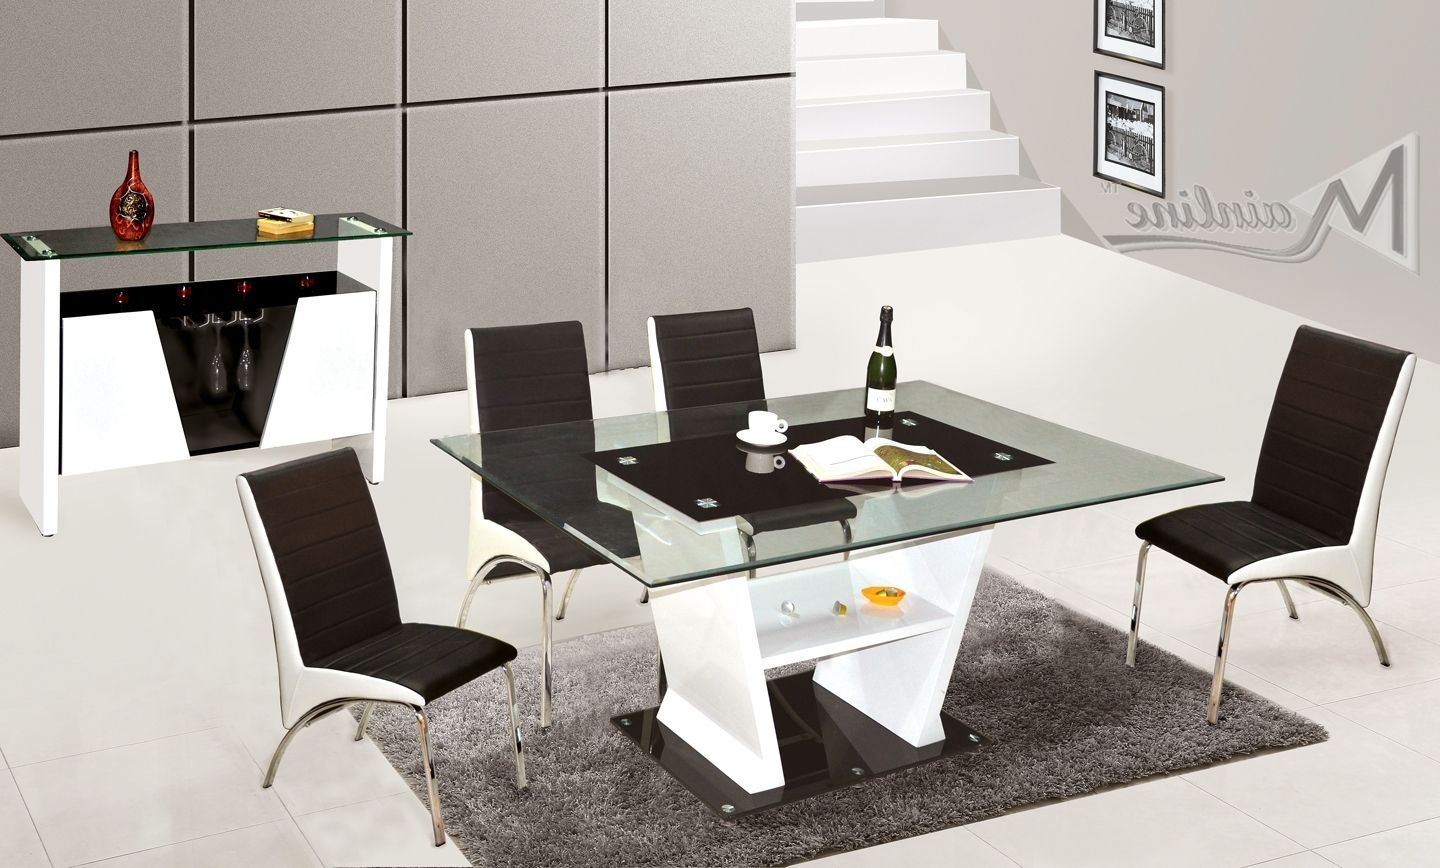 Vogue Dining Tables With Fashionable Vogue Table + 4 Chairs 22700/30 Mainline Inc Dining Table Sets (View 8 of 25)